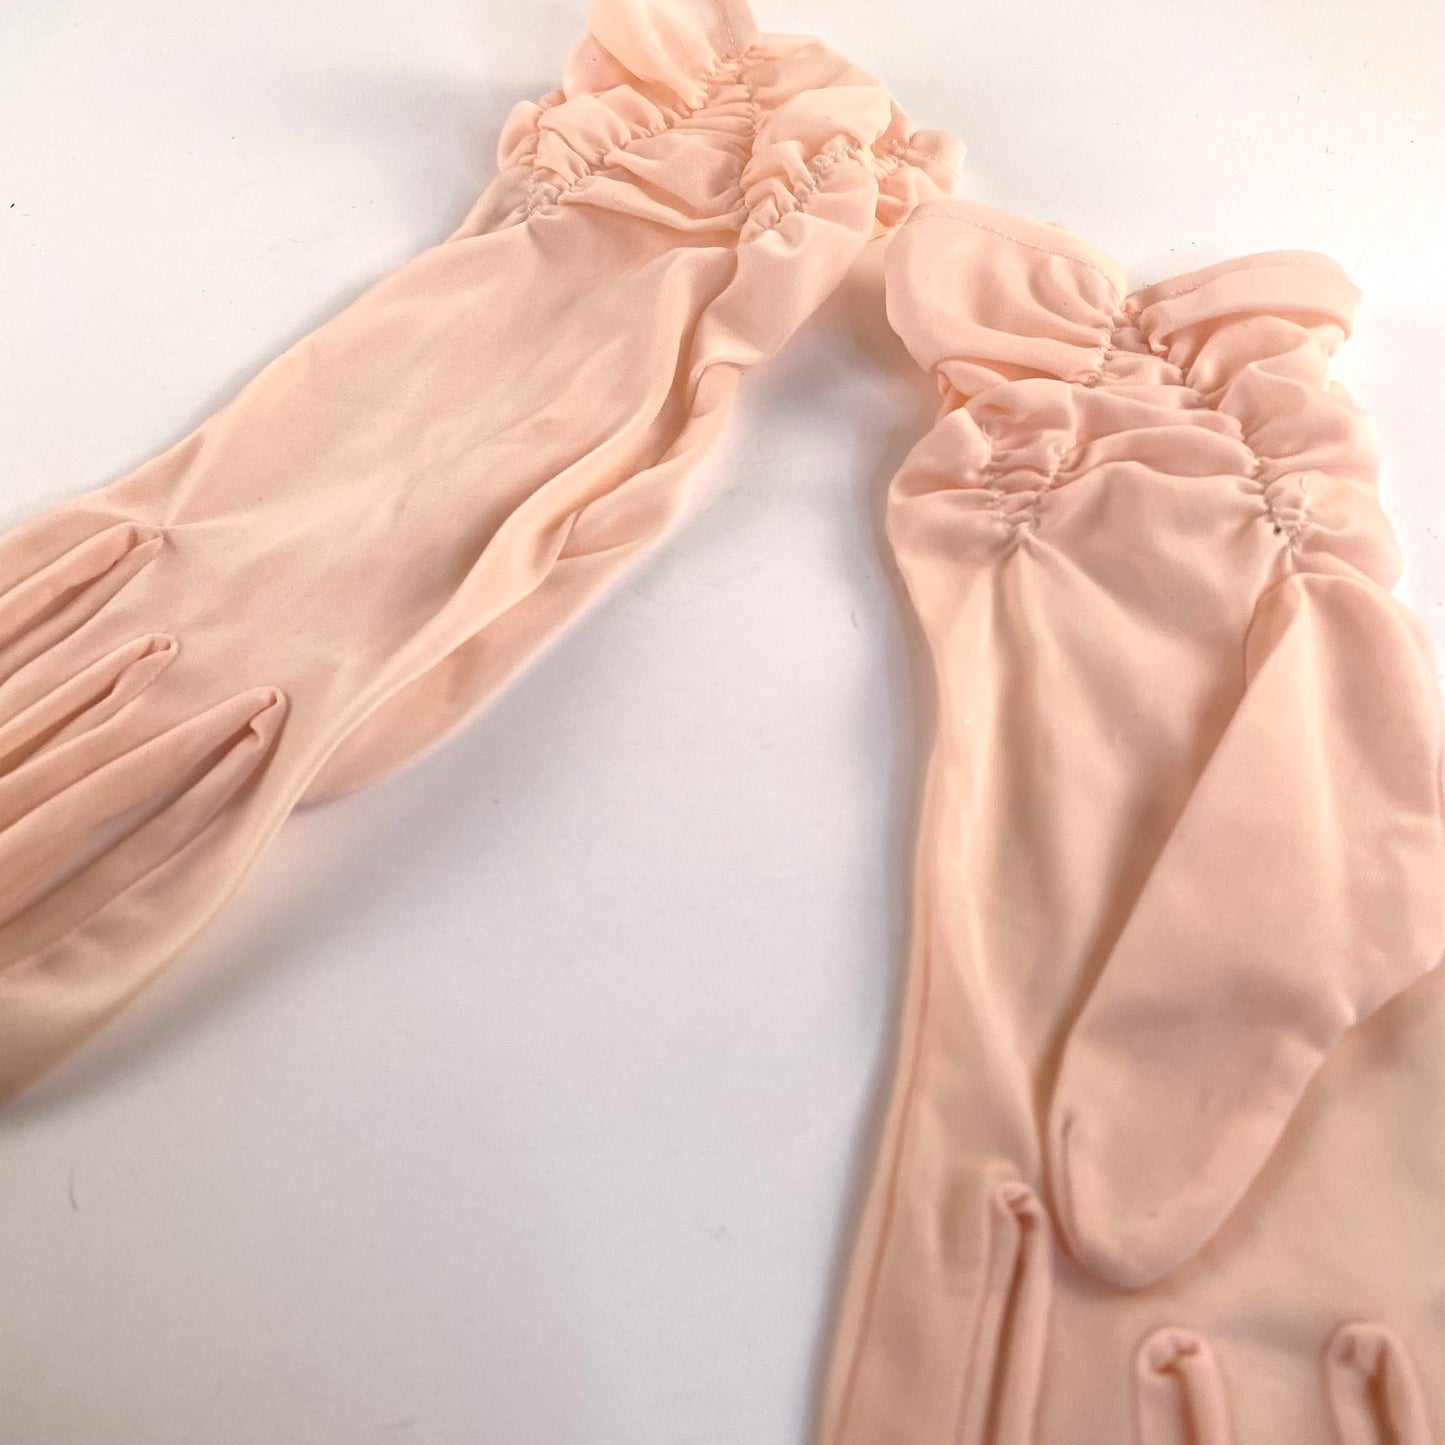 1950s Fownes Pale Pink Sheer Nylon Gloves